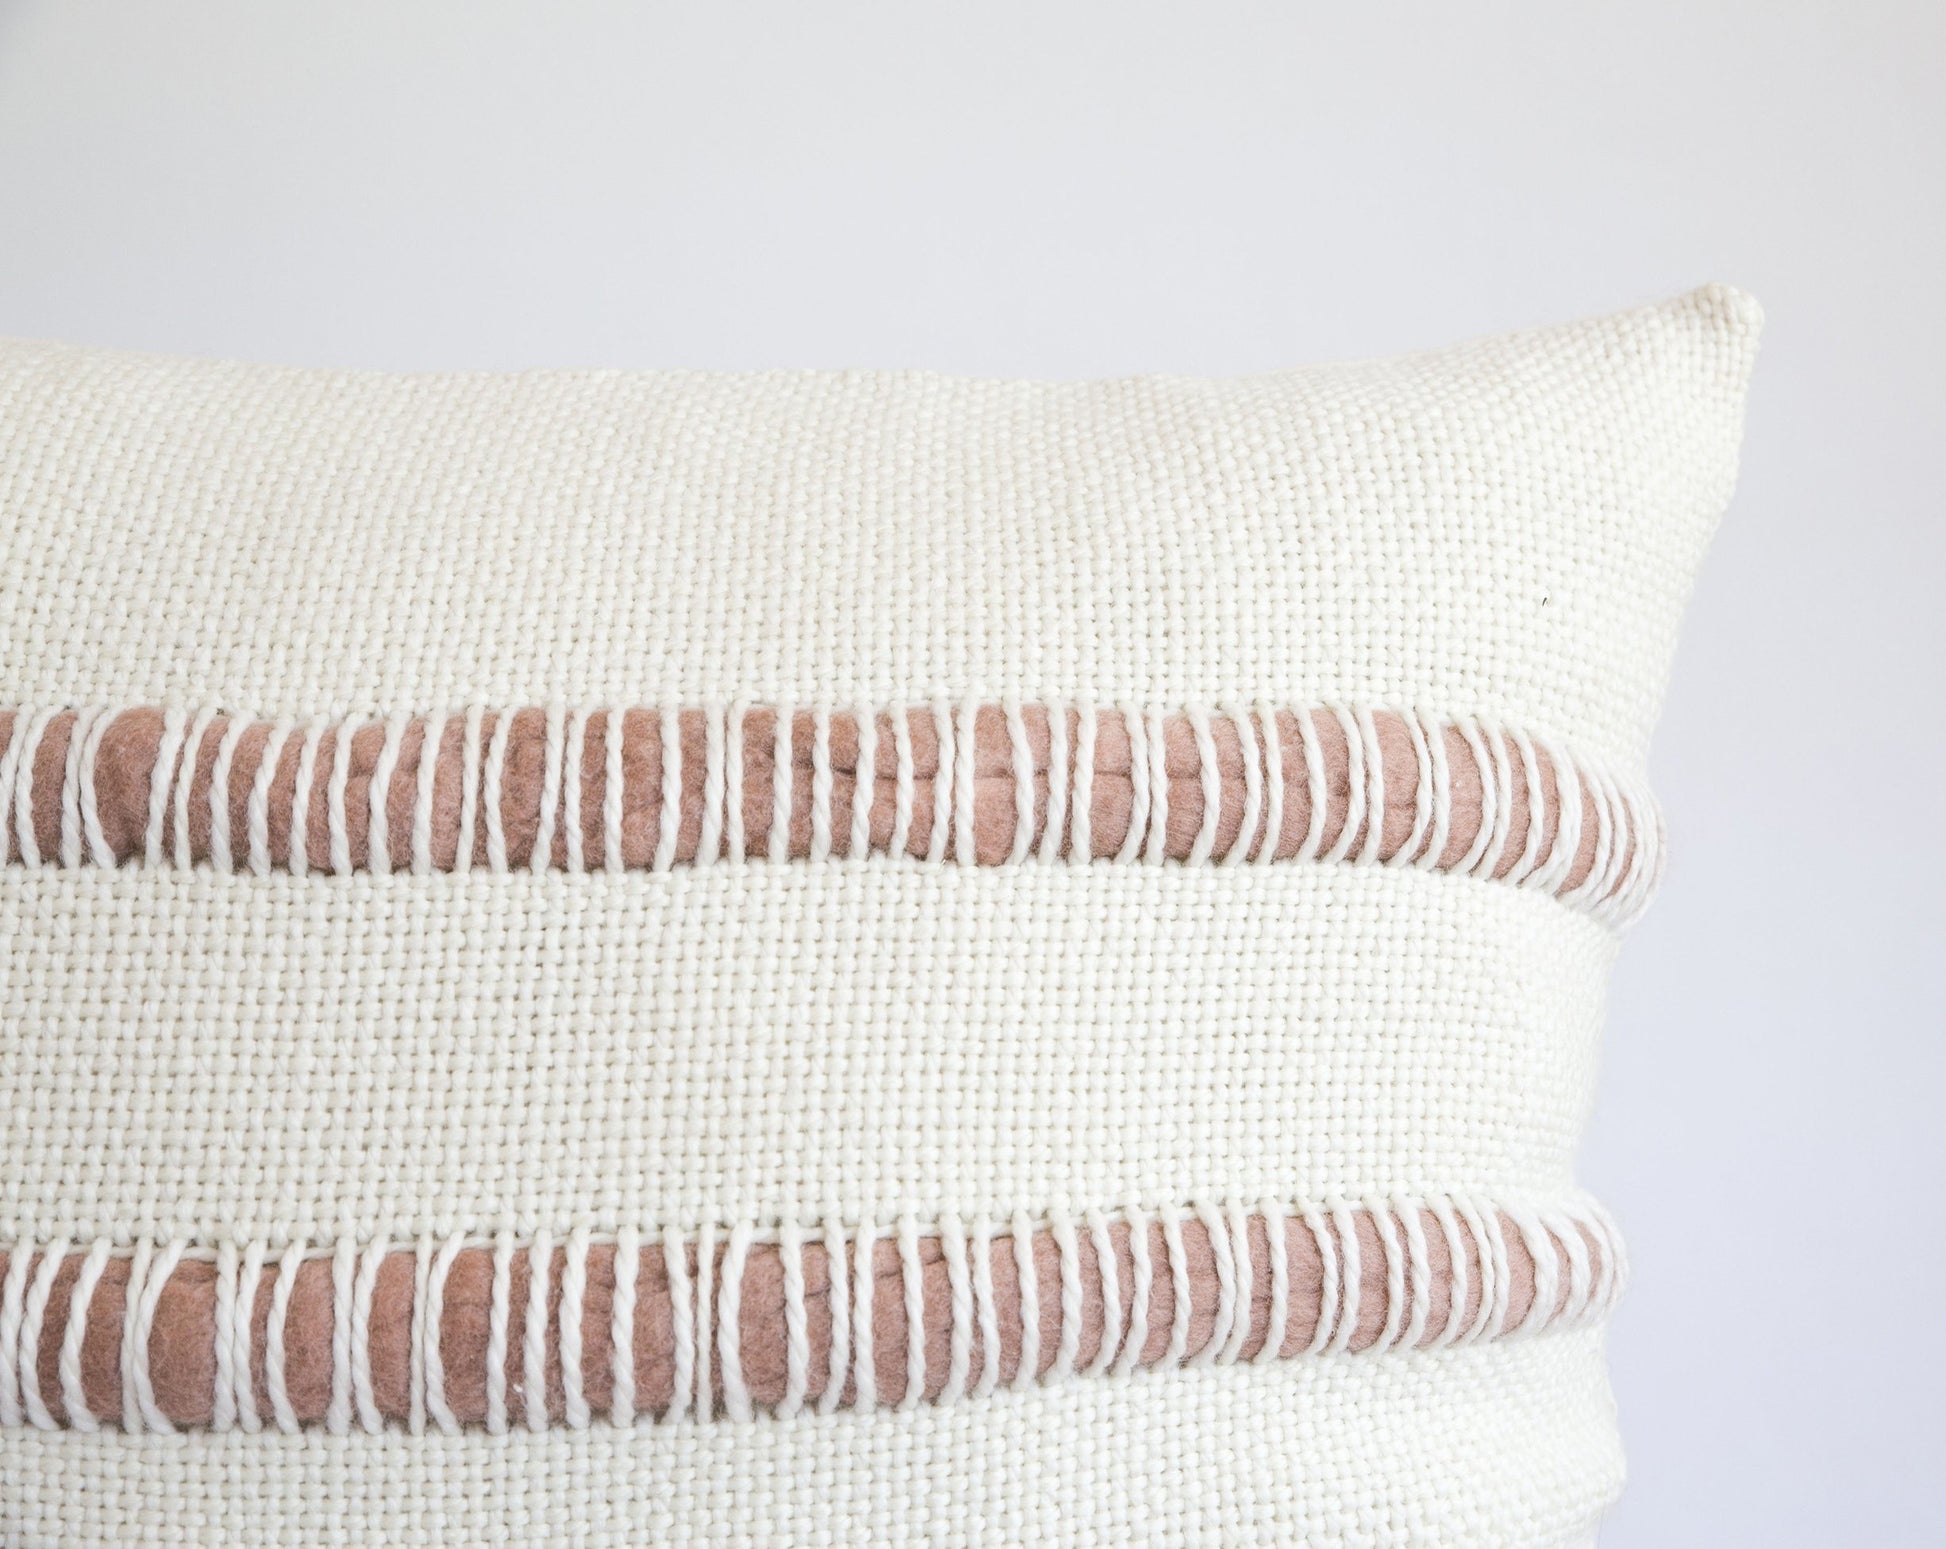 Handwoven cushion cover with rose roving stripes - Closely details